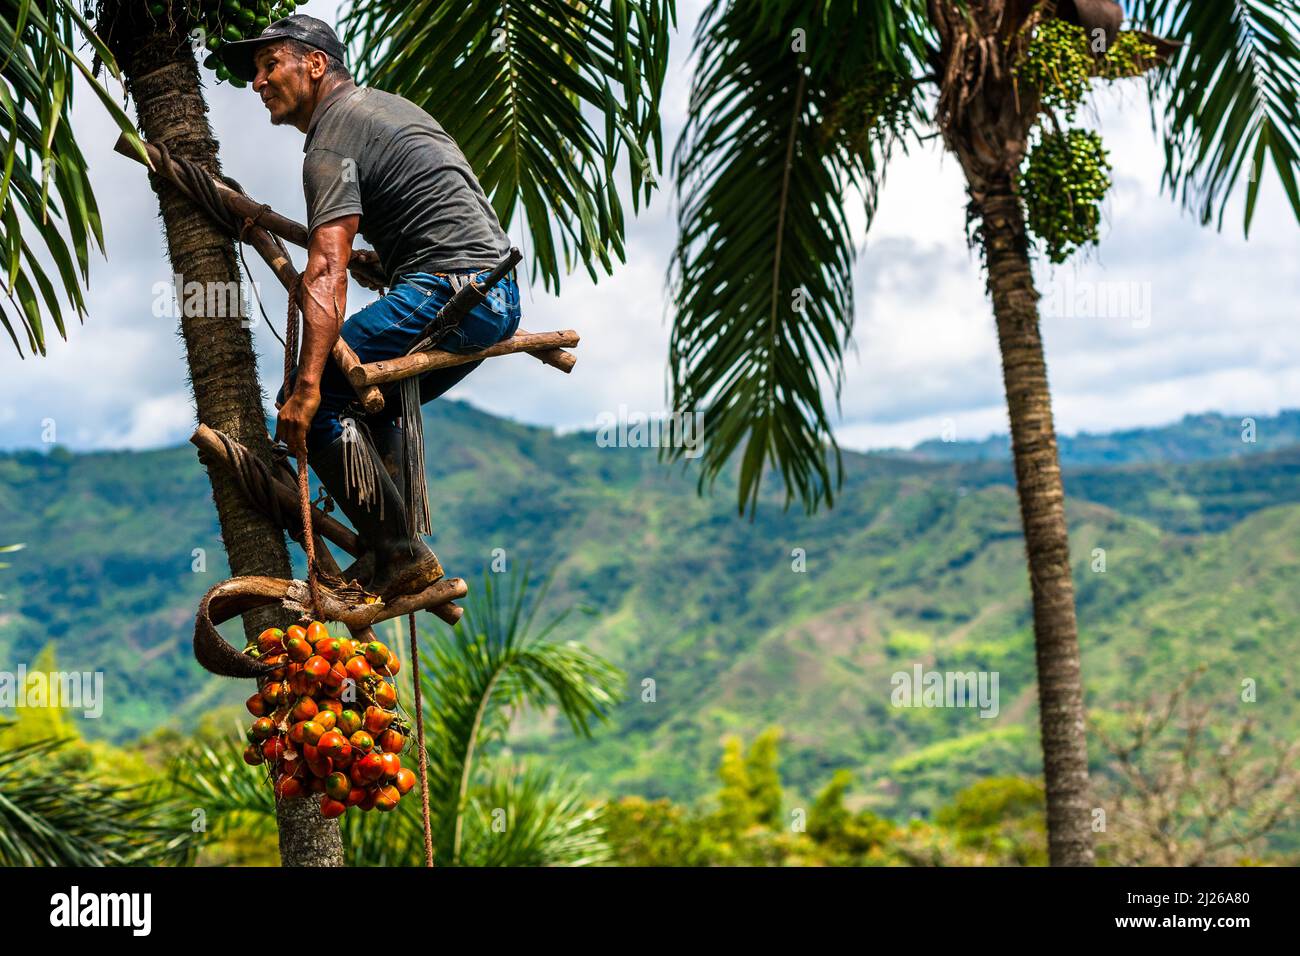 A Colombian farmer, climbing a peach palm tree, lowers a bunch of harvested chontaduro fruits on a farm near El Tambo, Cauca, Colombia. Stock Photo